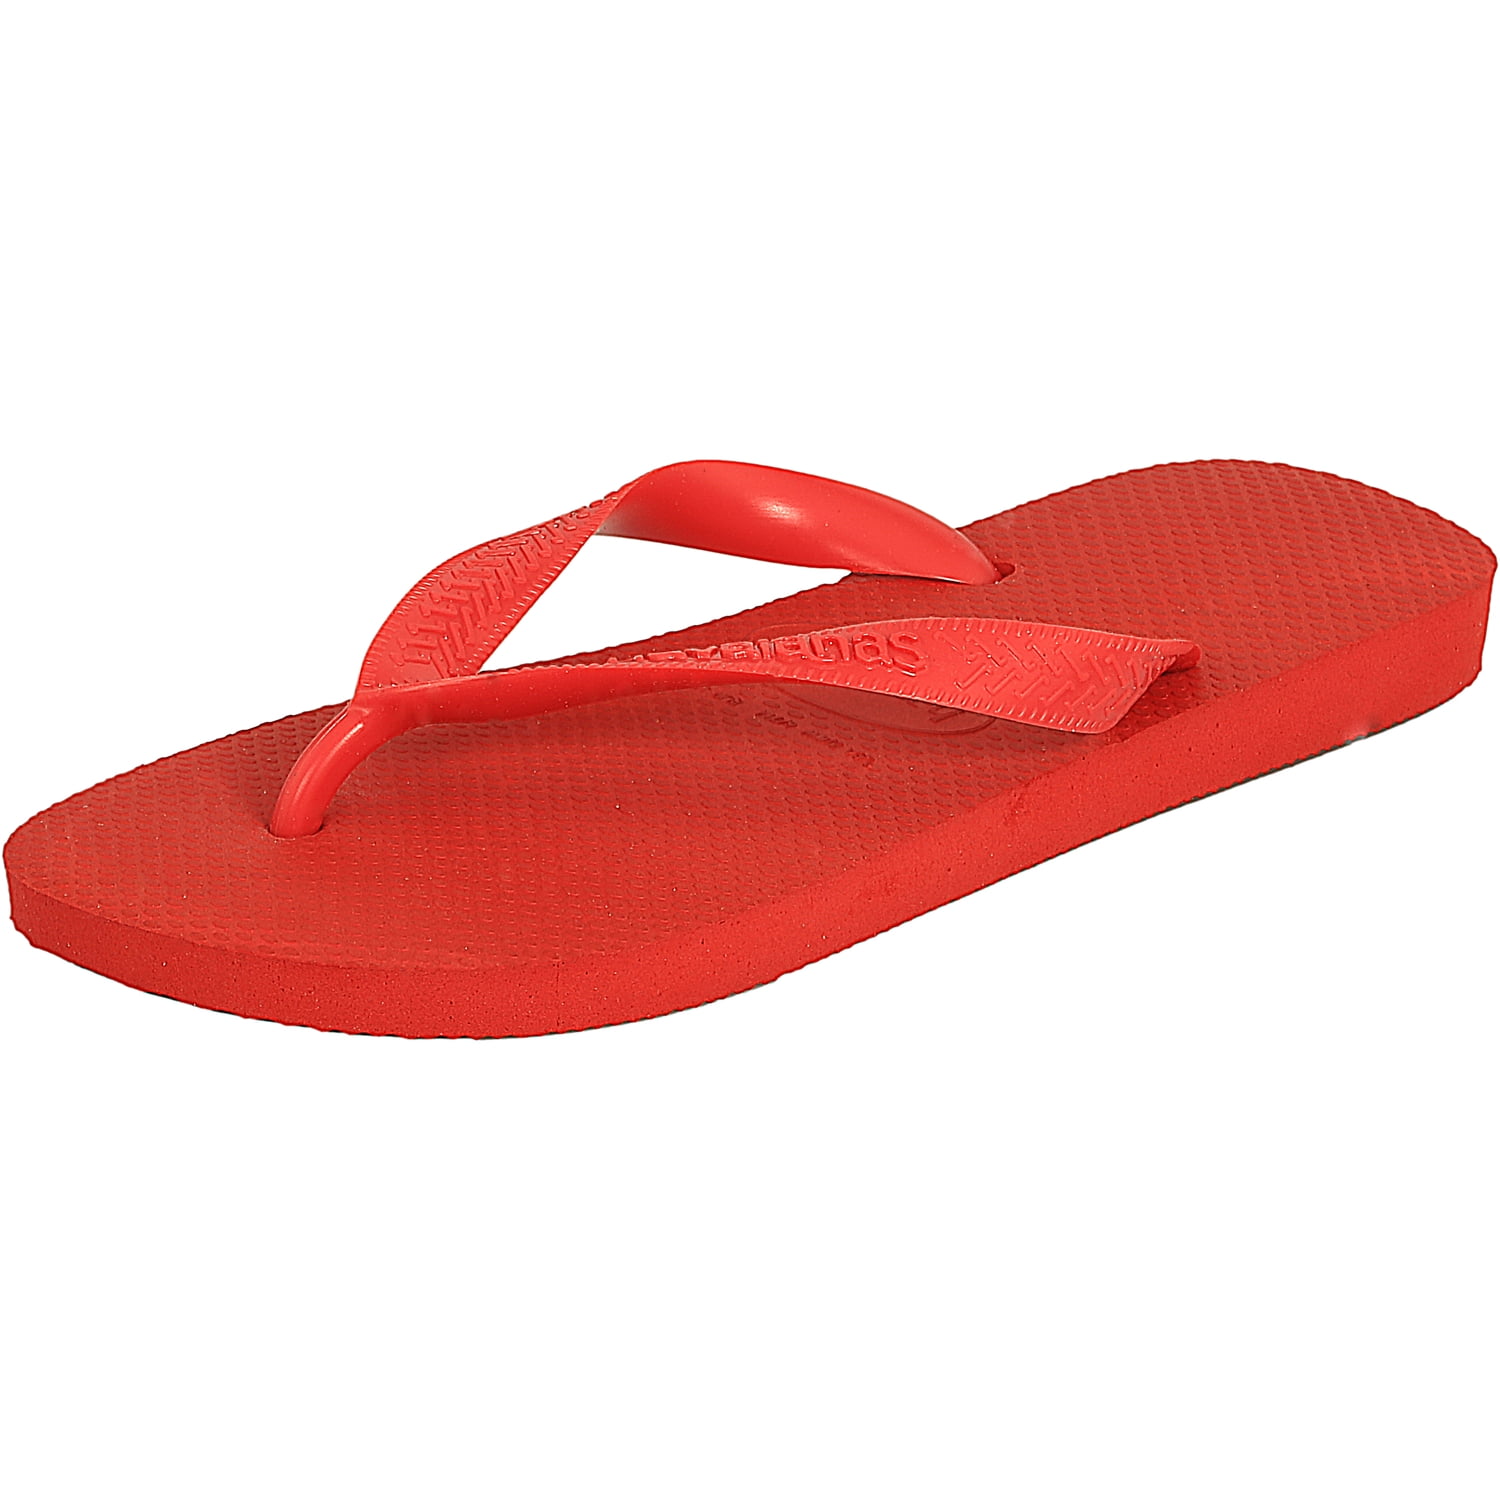 Efterforskning fire discolor Havaianas H. Top Ruby Red Sandal - 8M / 7M - Walmart.com